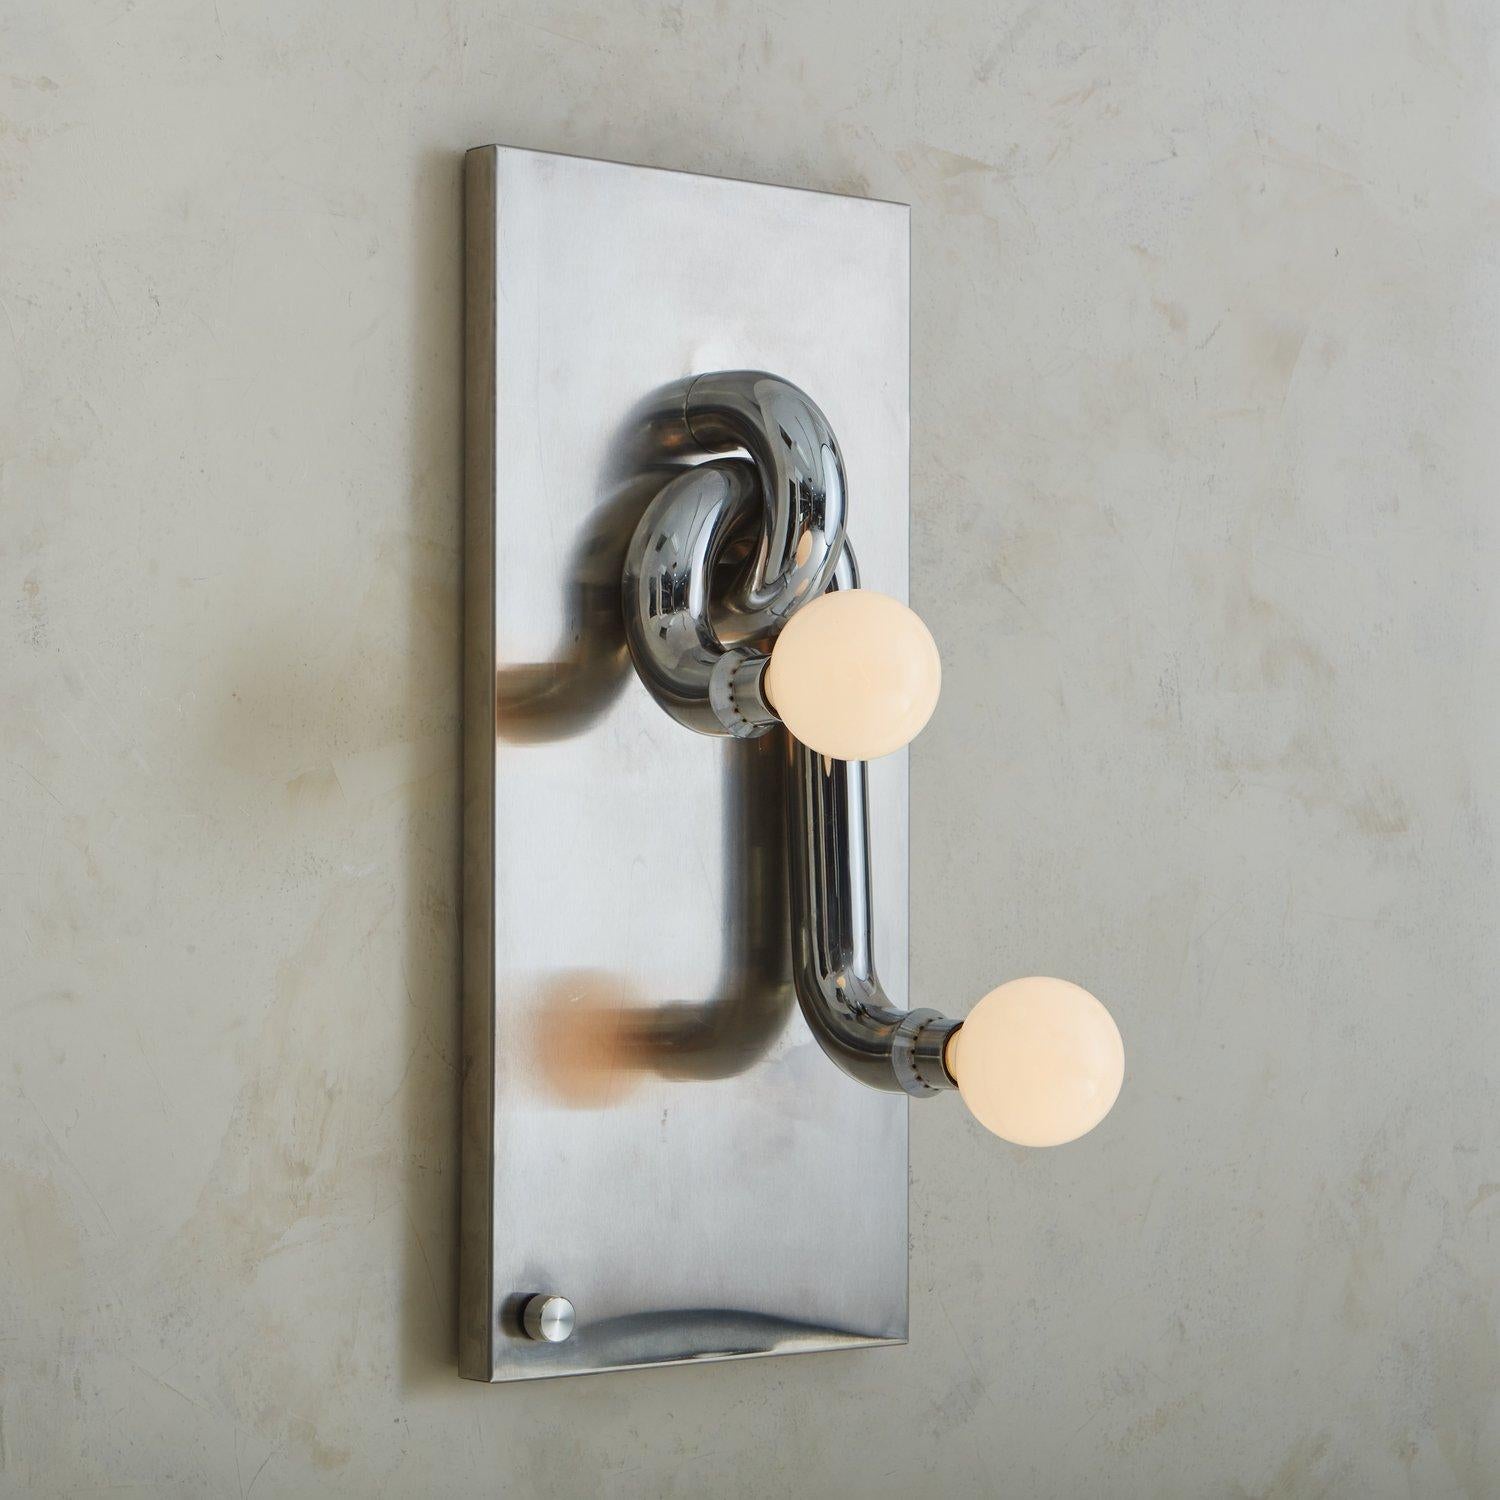 A sculptural Italian wall sconce with a rectangular chrome backplate, from which two intertwined, cylindrical arms extend. Each arm curves outwards at different lengths and supports one bulb. It turns on with a small circular knob on the lower left